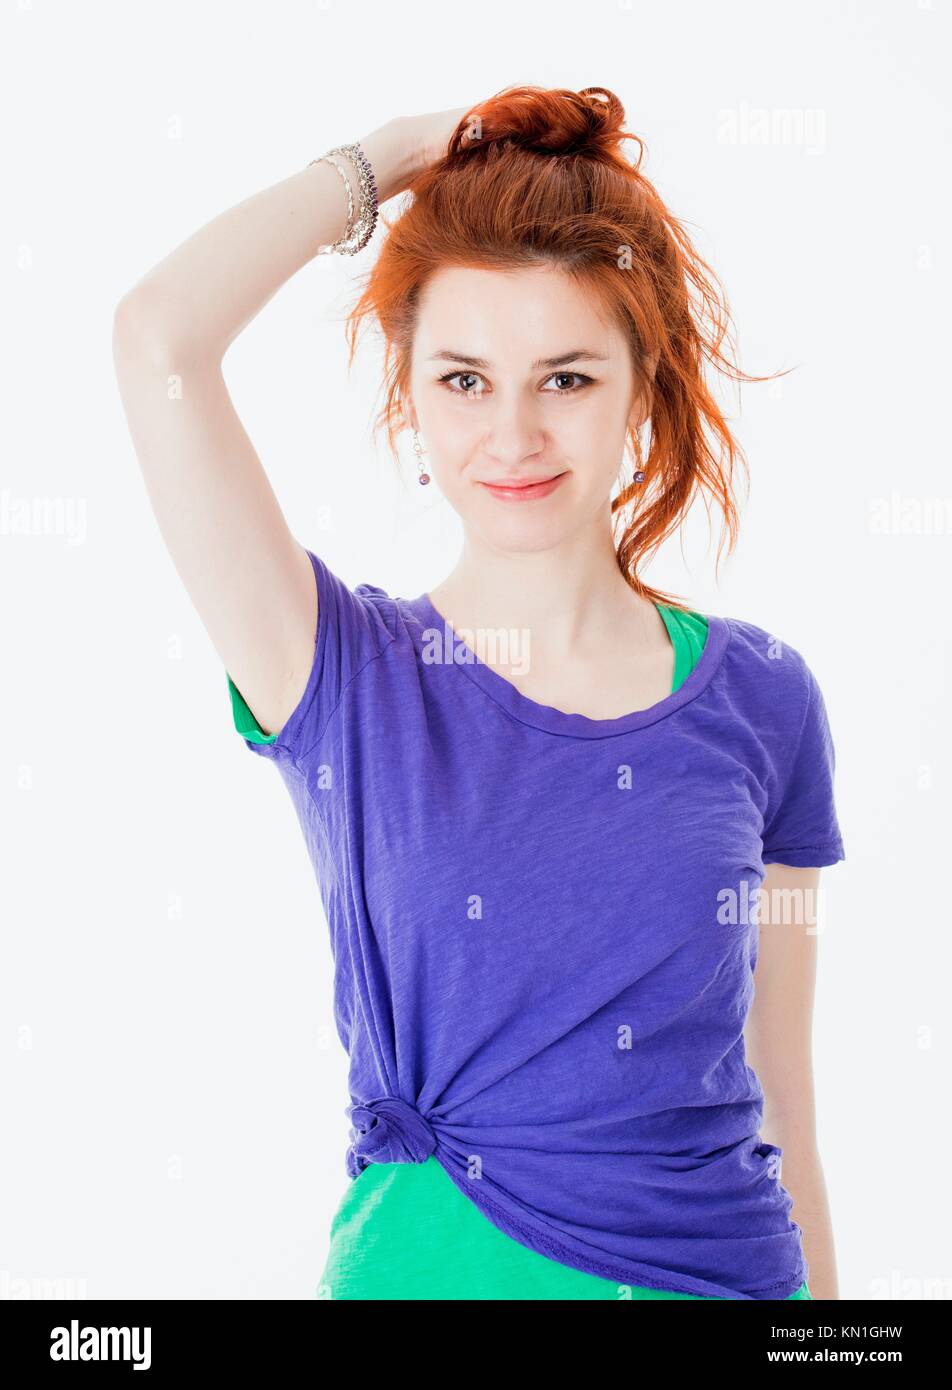 Studio portrait of attractive young woman working out. Stock Photo